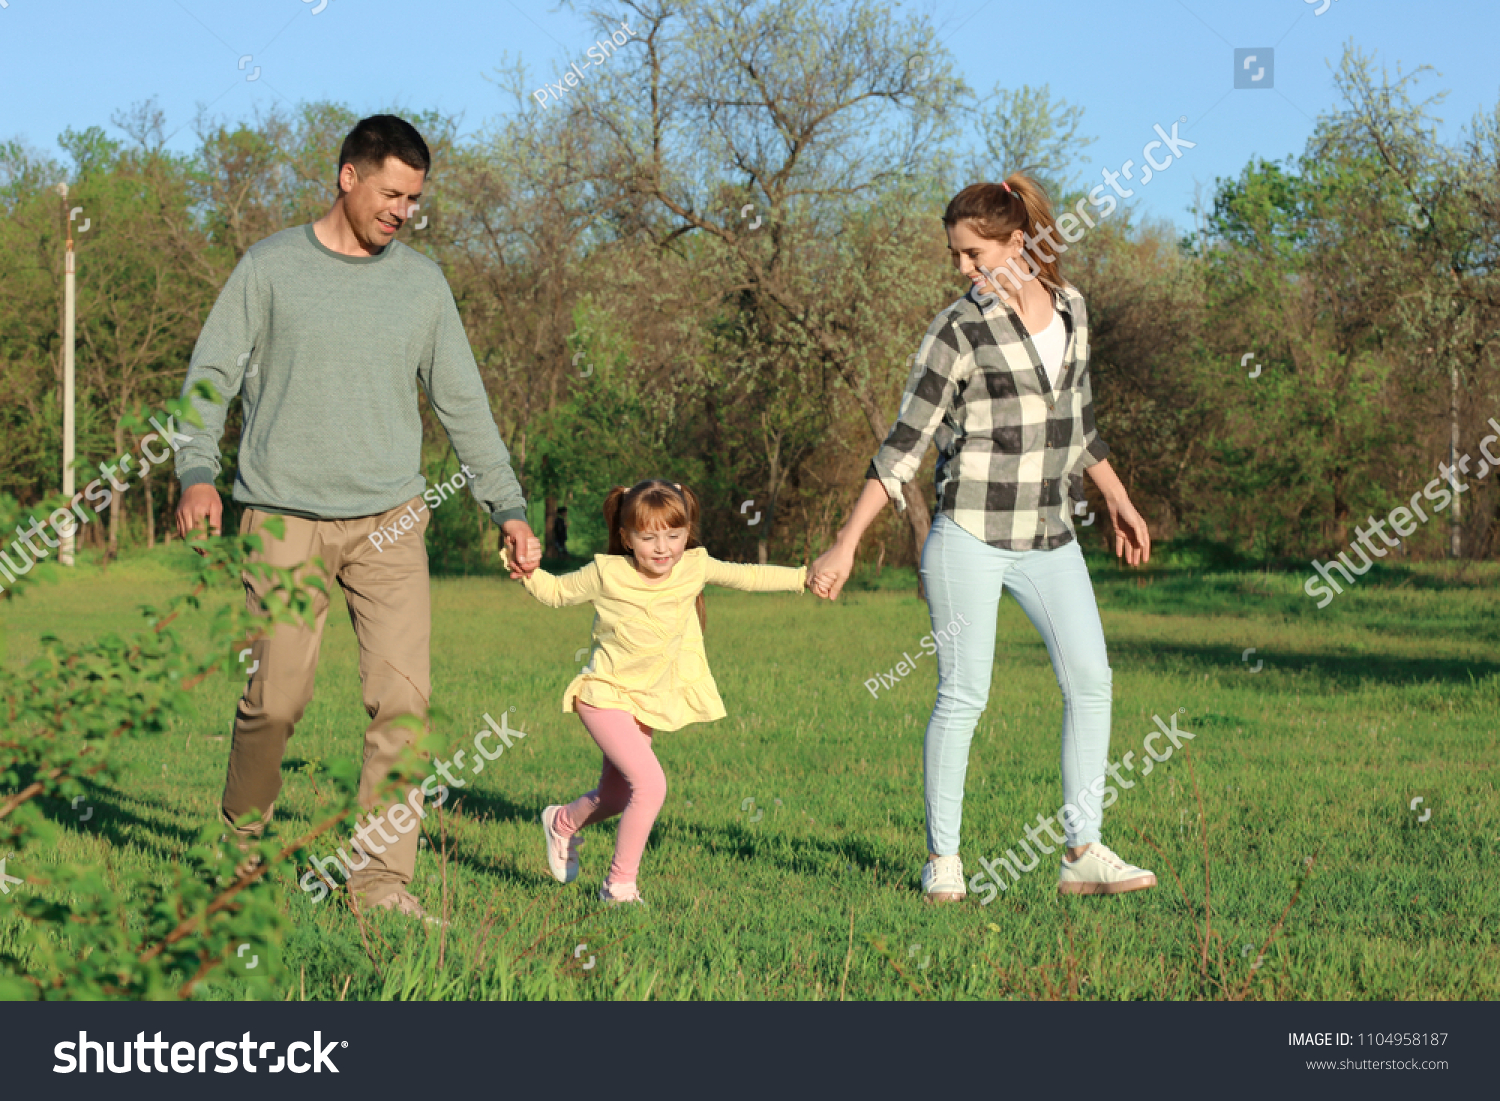 Happy family in park on sunny day #1104958187